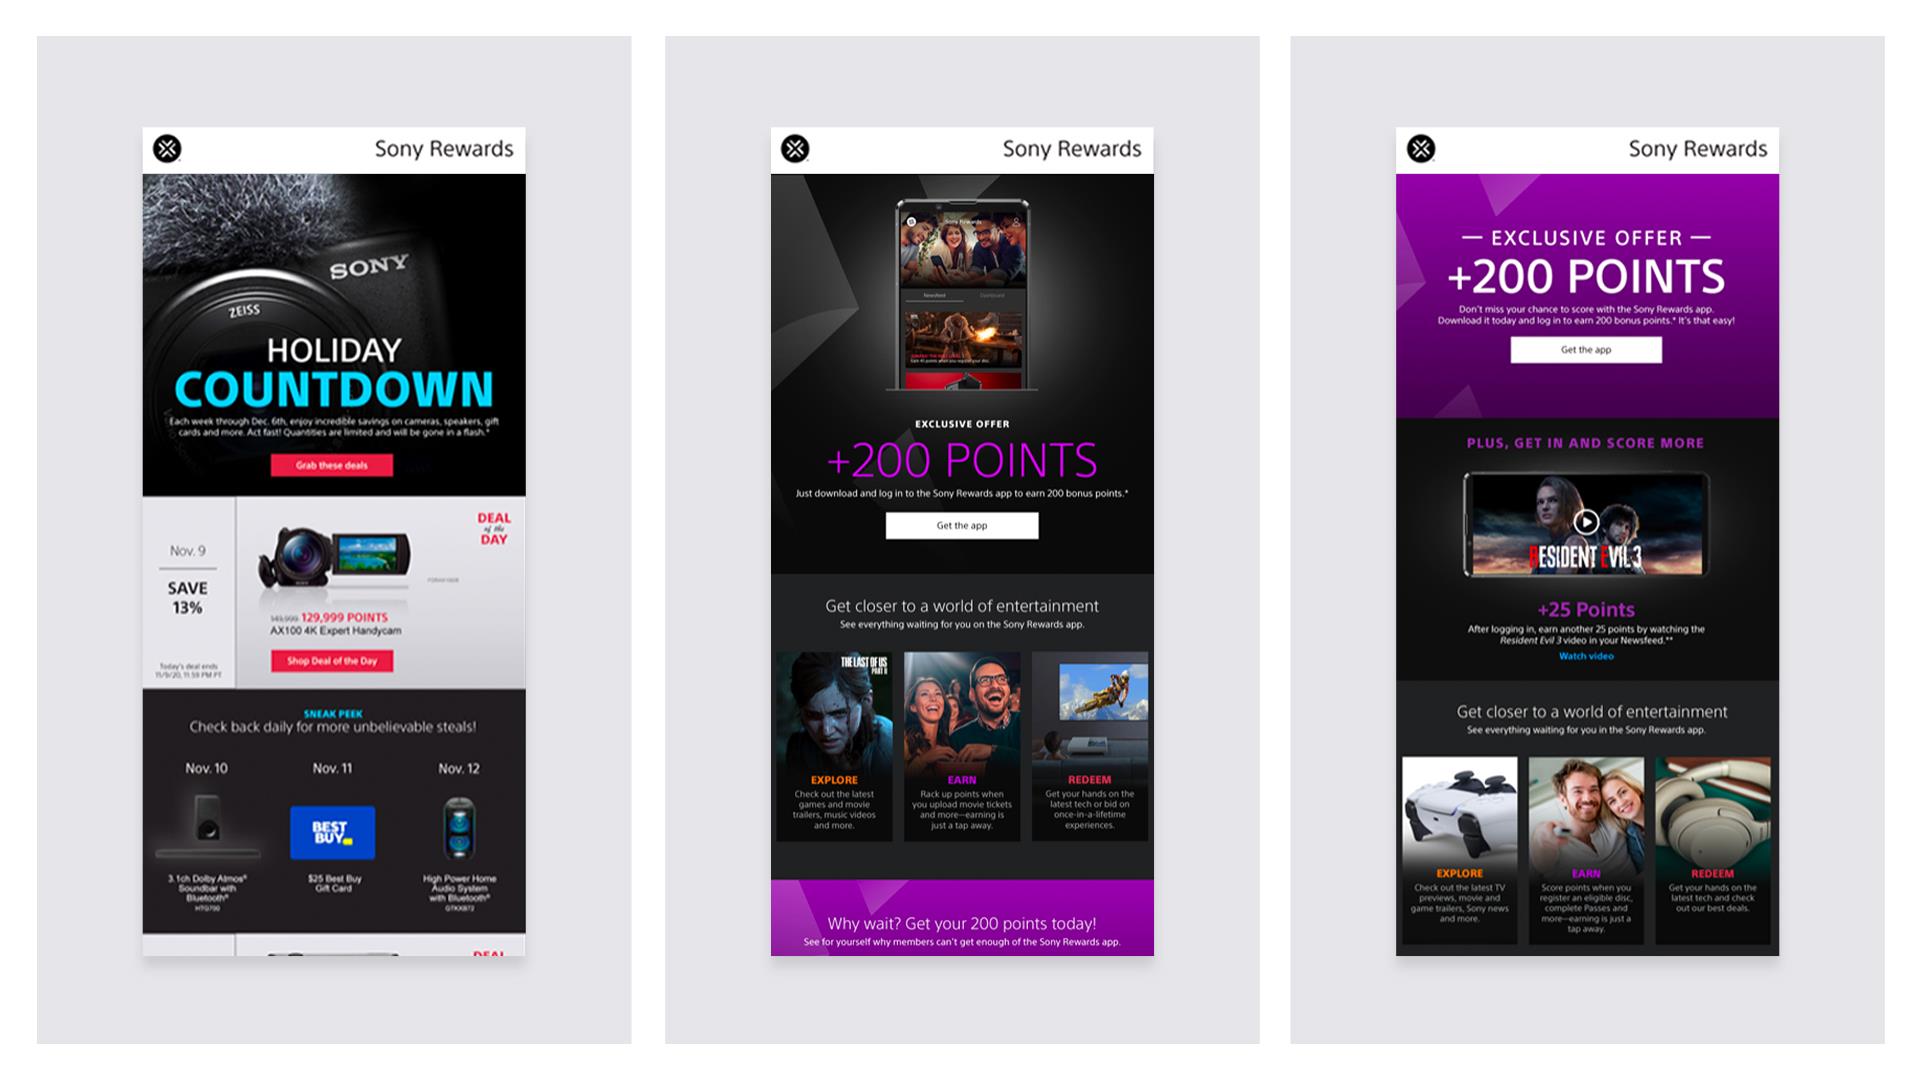 Sony – Rewards App Visits Grow With a Fresh Gamified Experience